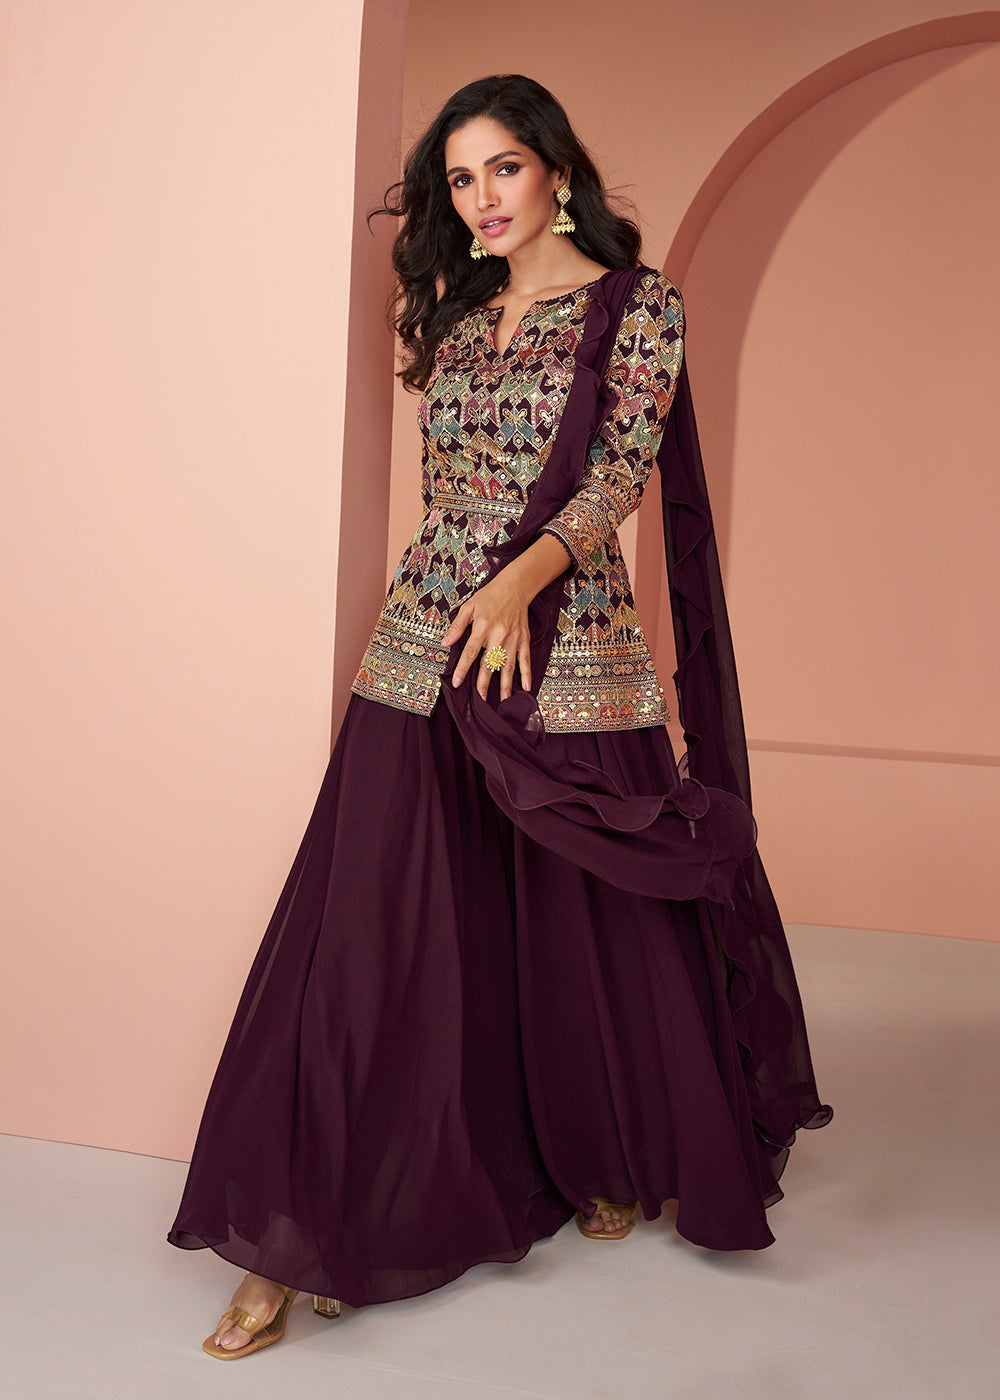 Buy Now Multi Wine Embroidered Georgette Indo Western Palazzo Suit Online in USA, UK, Canada, Germany, Australia & Worldwide at Empress Clothing. 